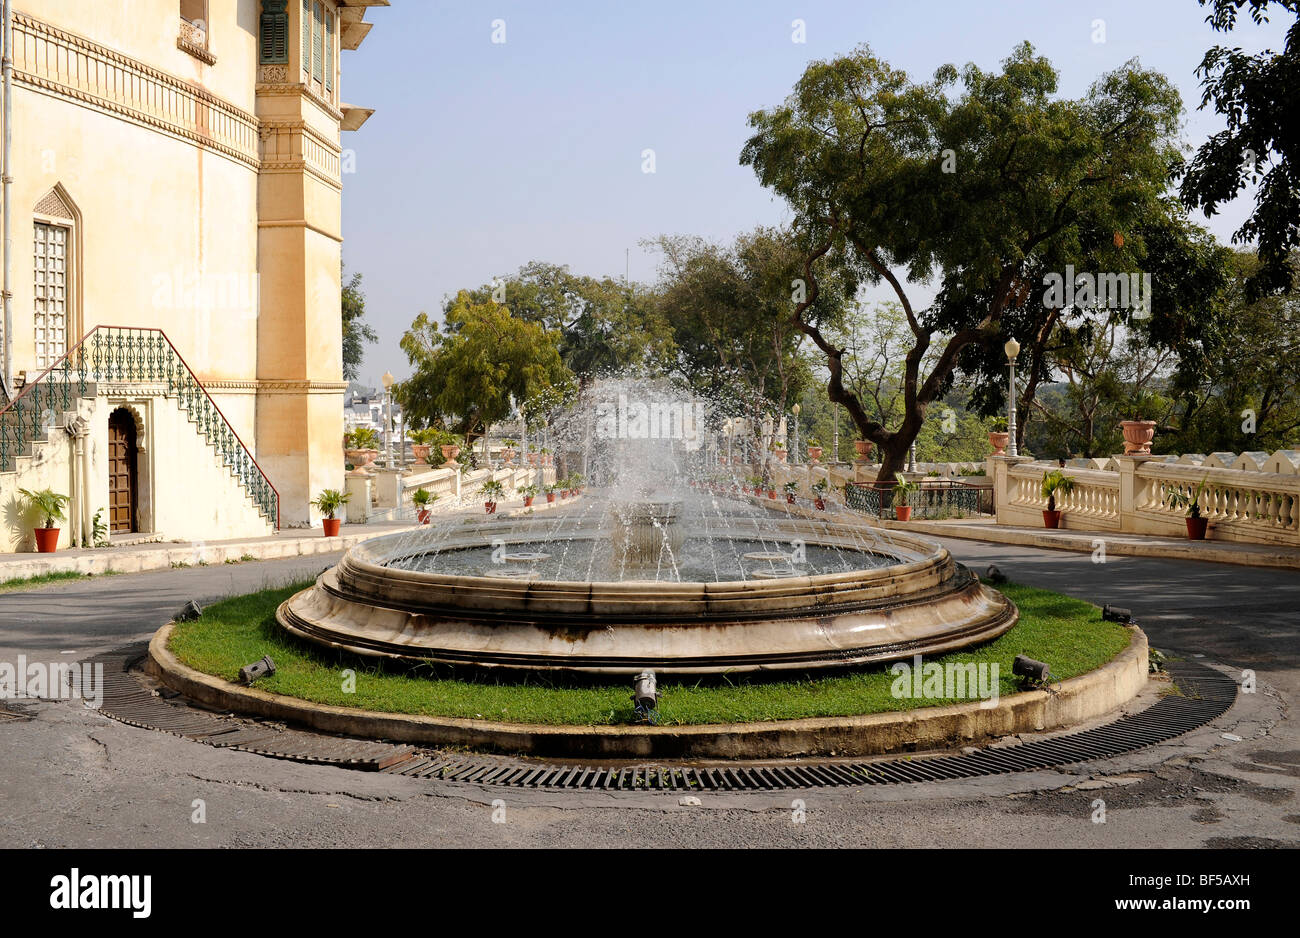 Fountains in front of the city palace, Udaipur, Rajasthan, North India, India, South Asia, Asia Stock Photo